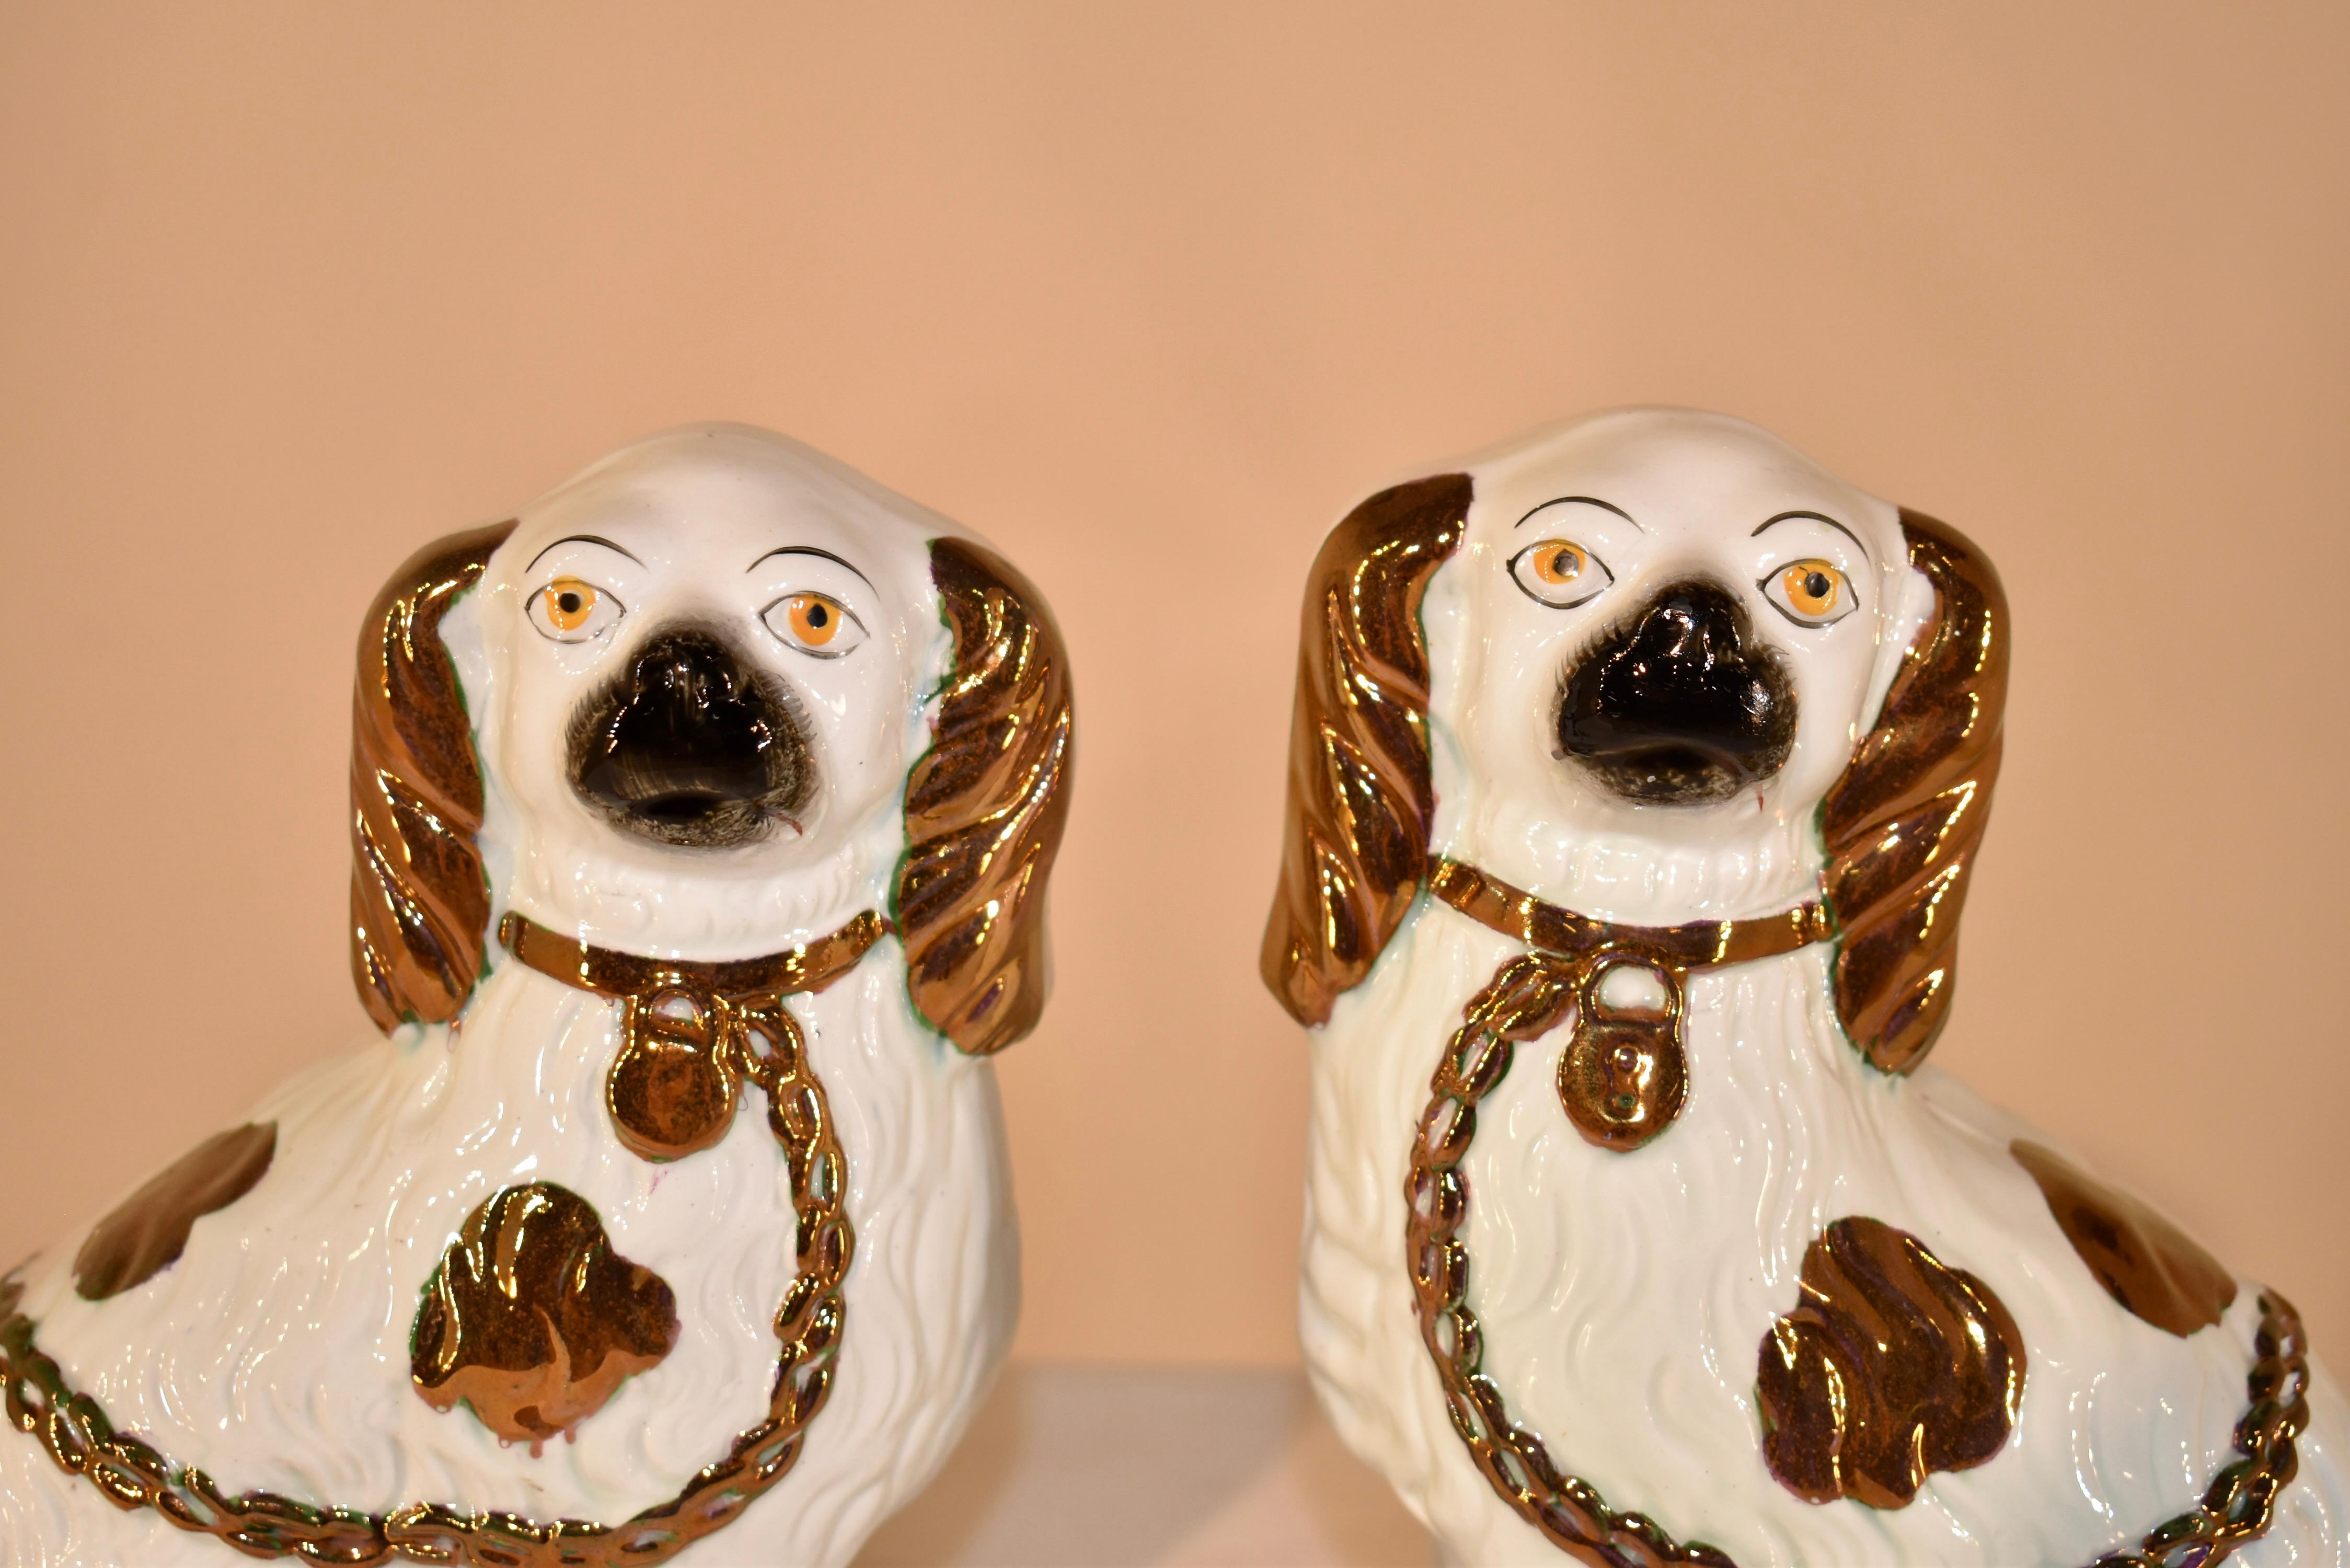 Pair of 19th century Staffordshire spaniel figures with separated front feet.  This pair of dogs has wonderful hand painted copper lustre decoration.  The dogs with separated legs are more rare and much harder to find.